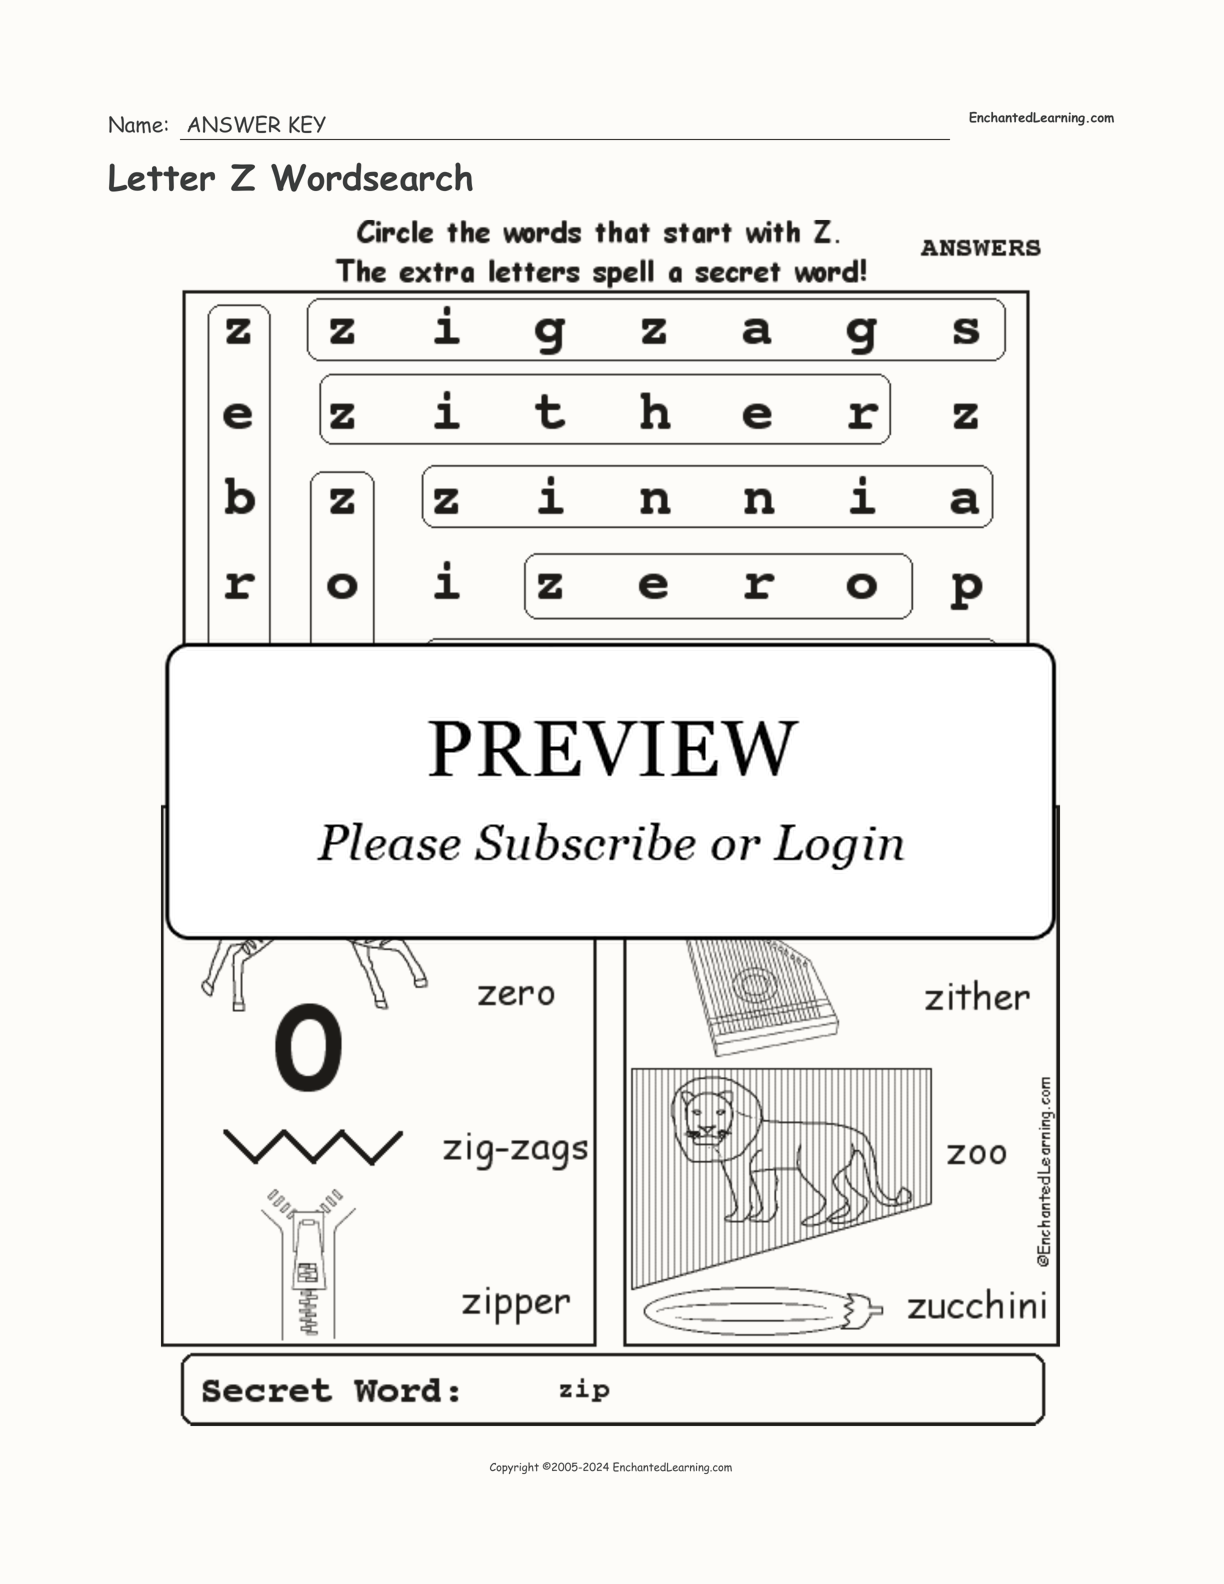 Letter Z Wordsearch interactive worksheet page 2